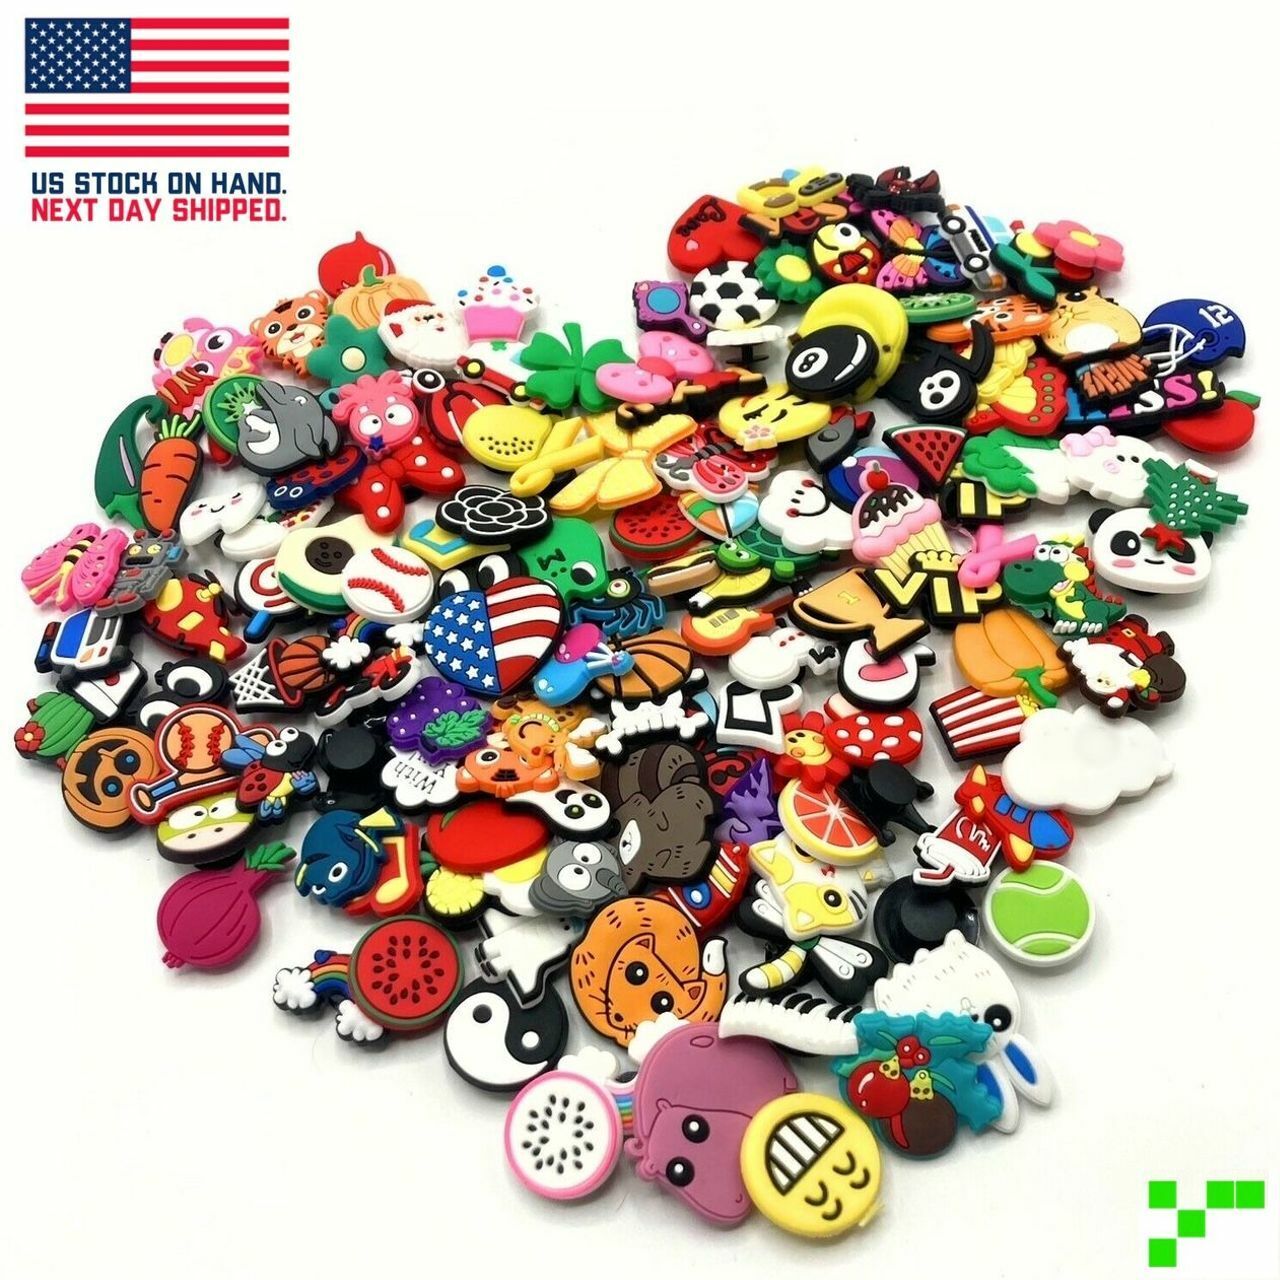 50 Random Shoe Charms Custom Lot Cute Kids Adults PVC Rubber for Clogs w/ Holes Unbranded Does not apply